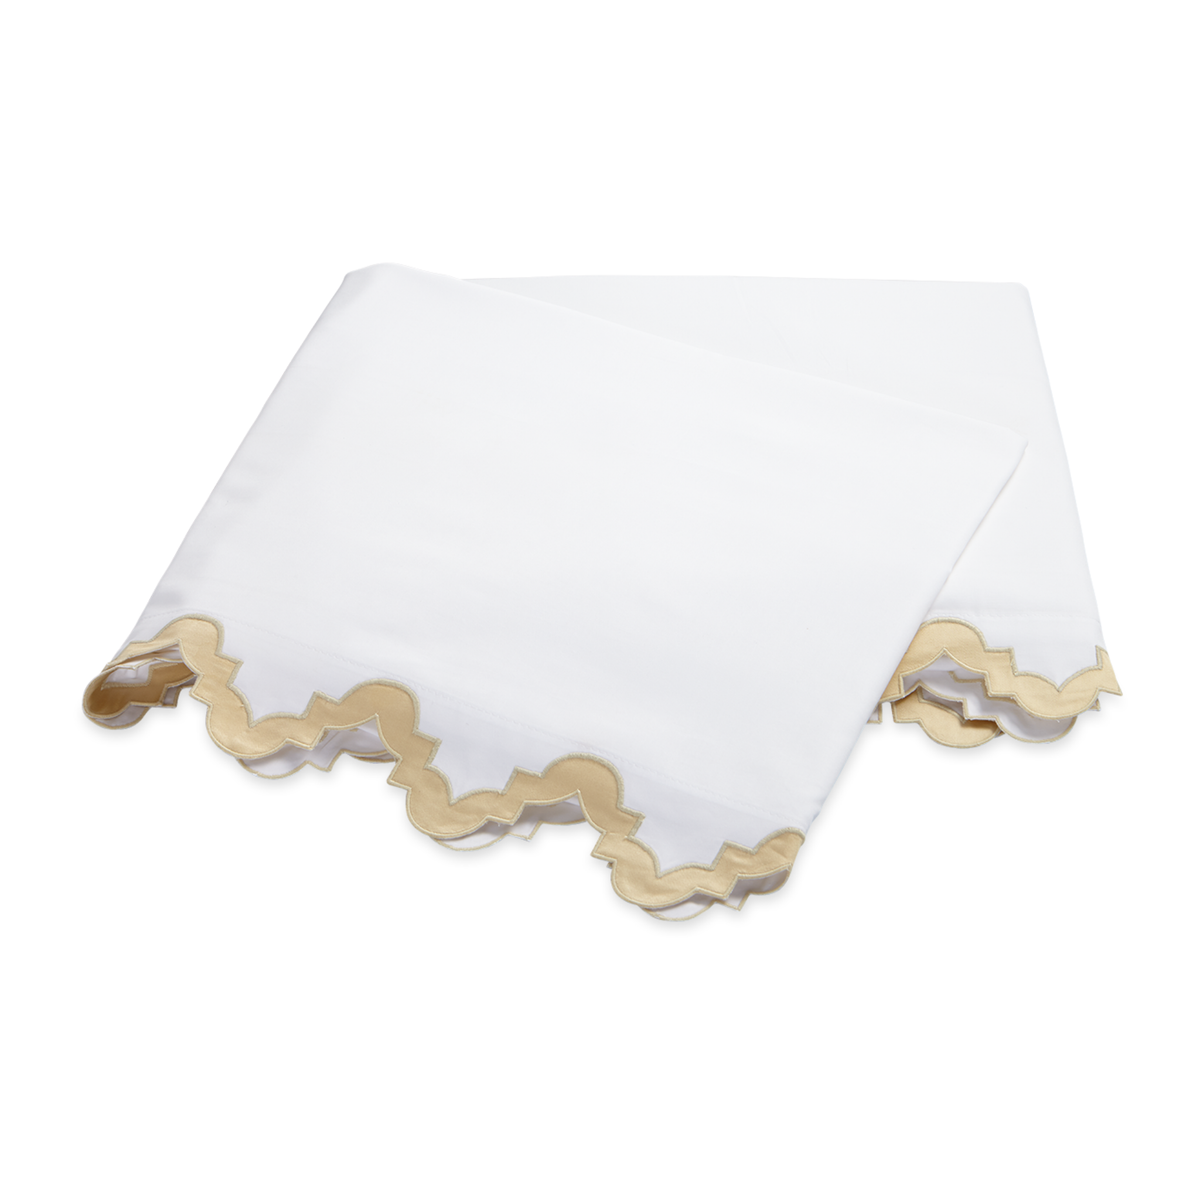 Folded Flat Sheet of Matouk Aziza Bedding in Champagne Color